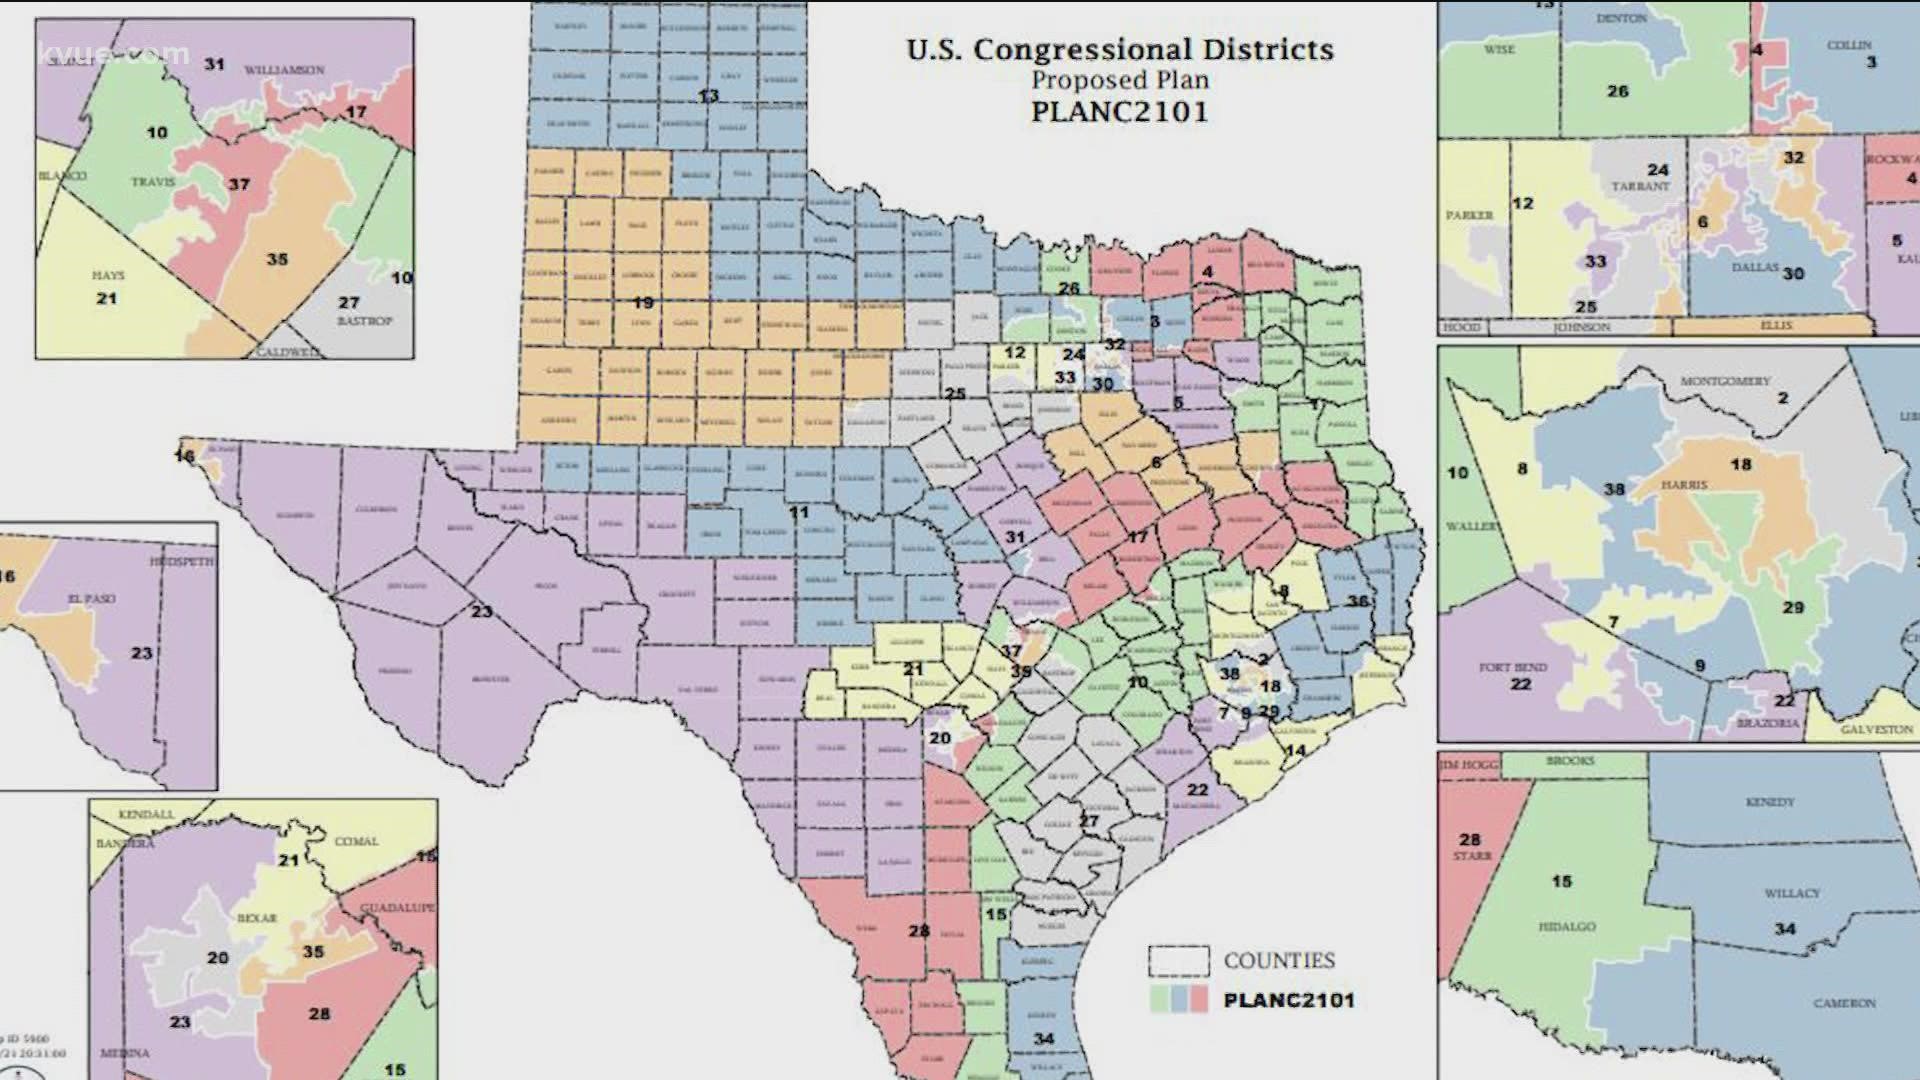 Texas is gaining two new U.S. Congressional seats, which means two new districts. In the newly proposed map, one new district includes parts of Austin.